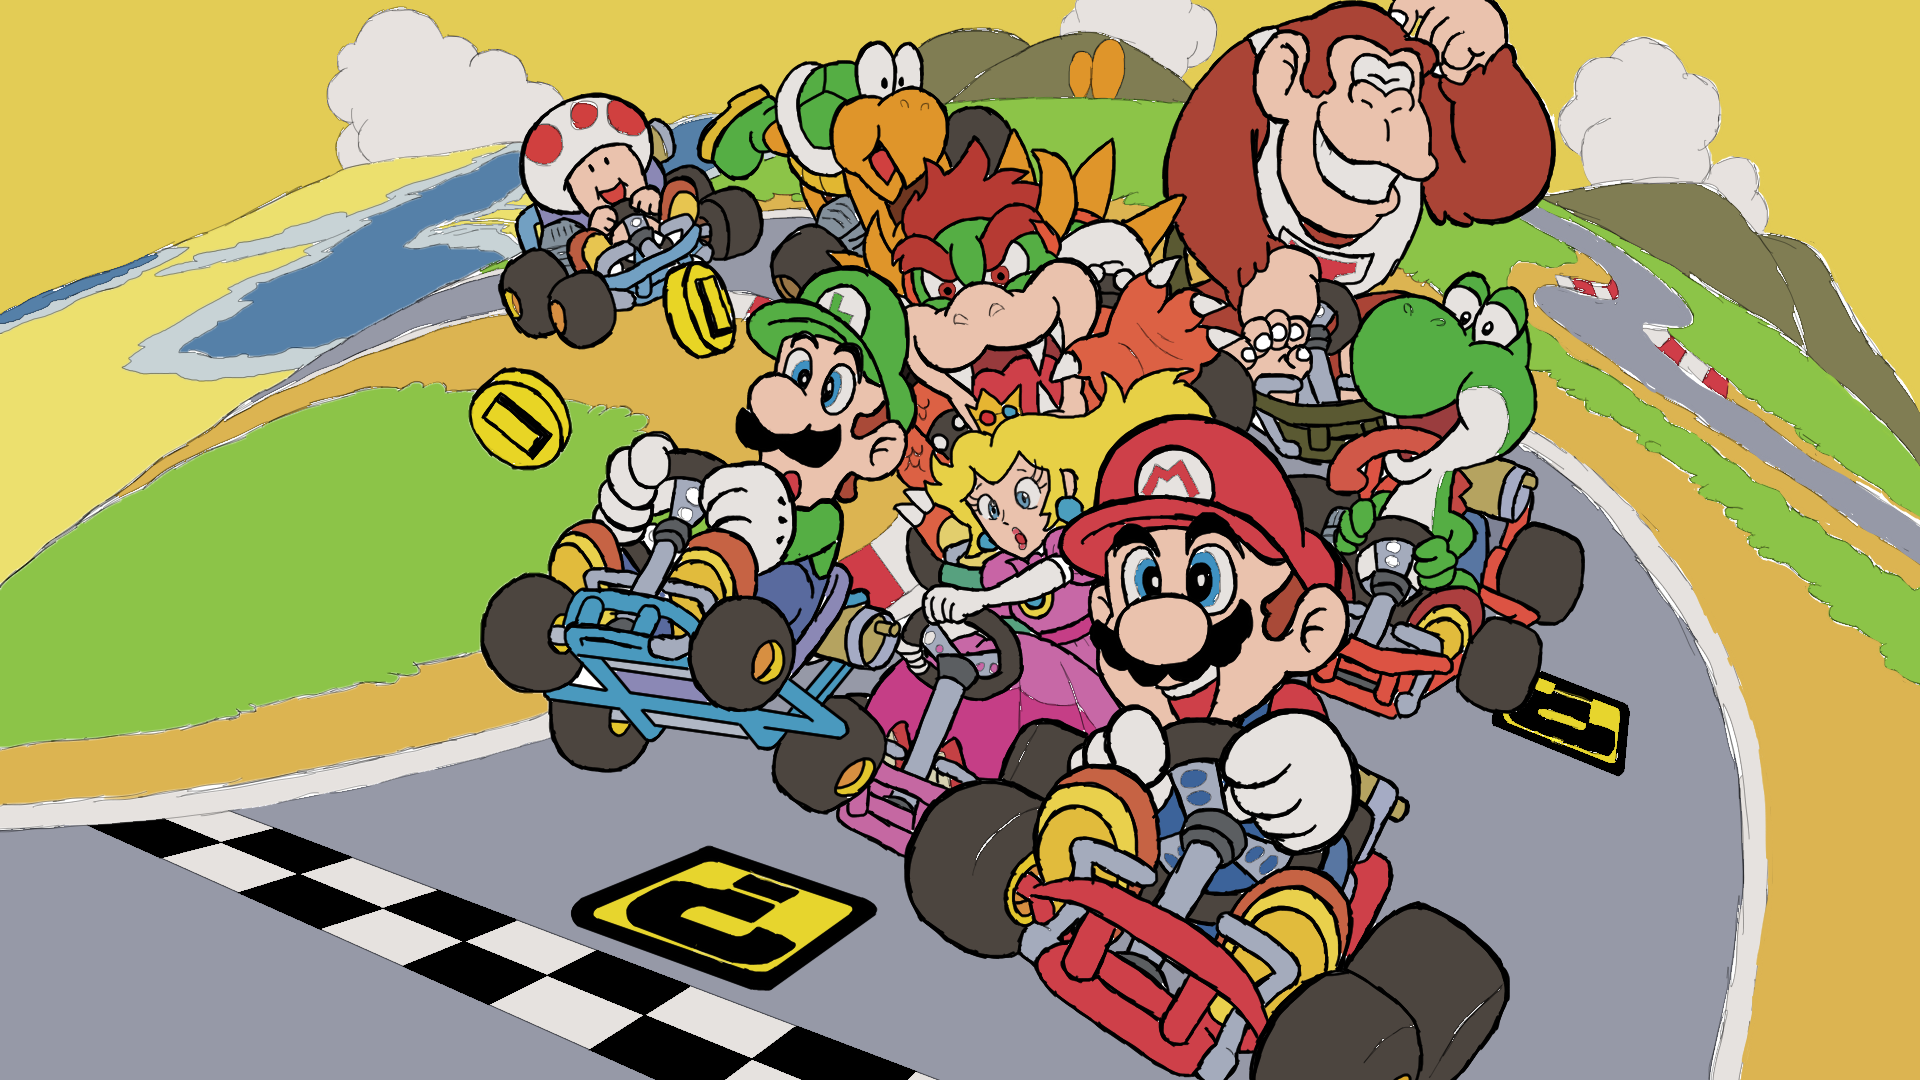 Mario Kart Tournaments are for everyone who grew up playing the iconic game!